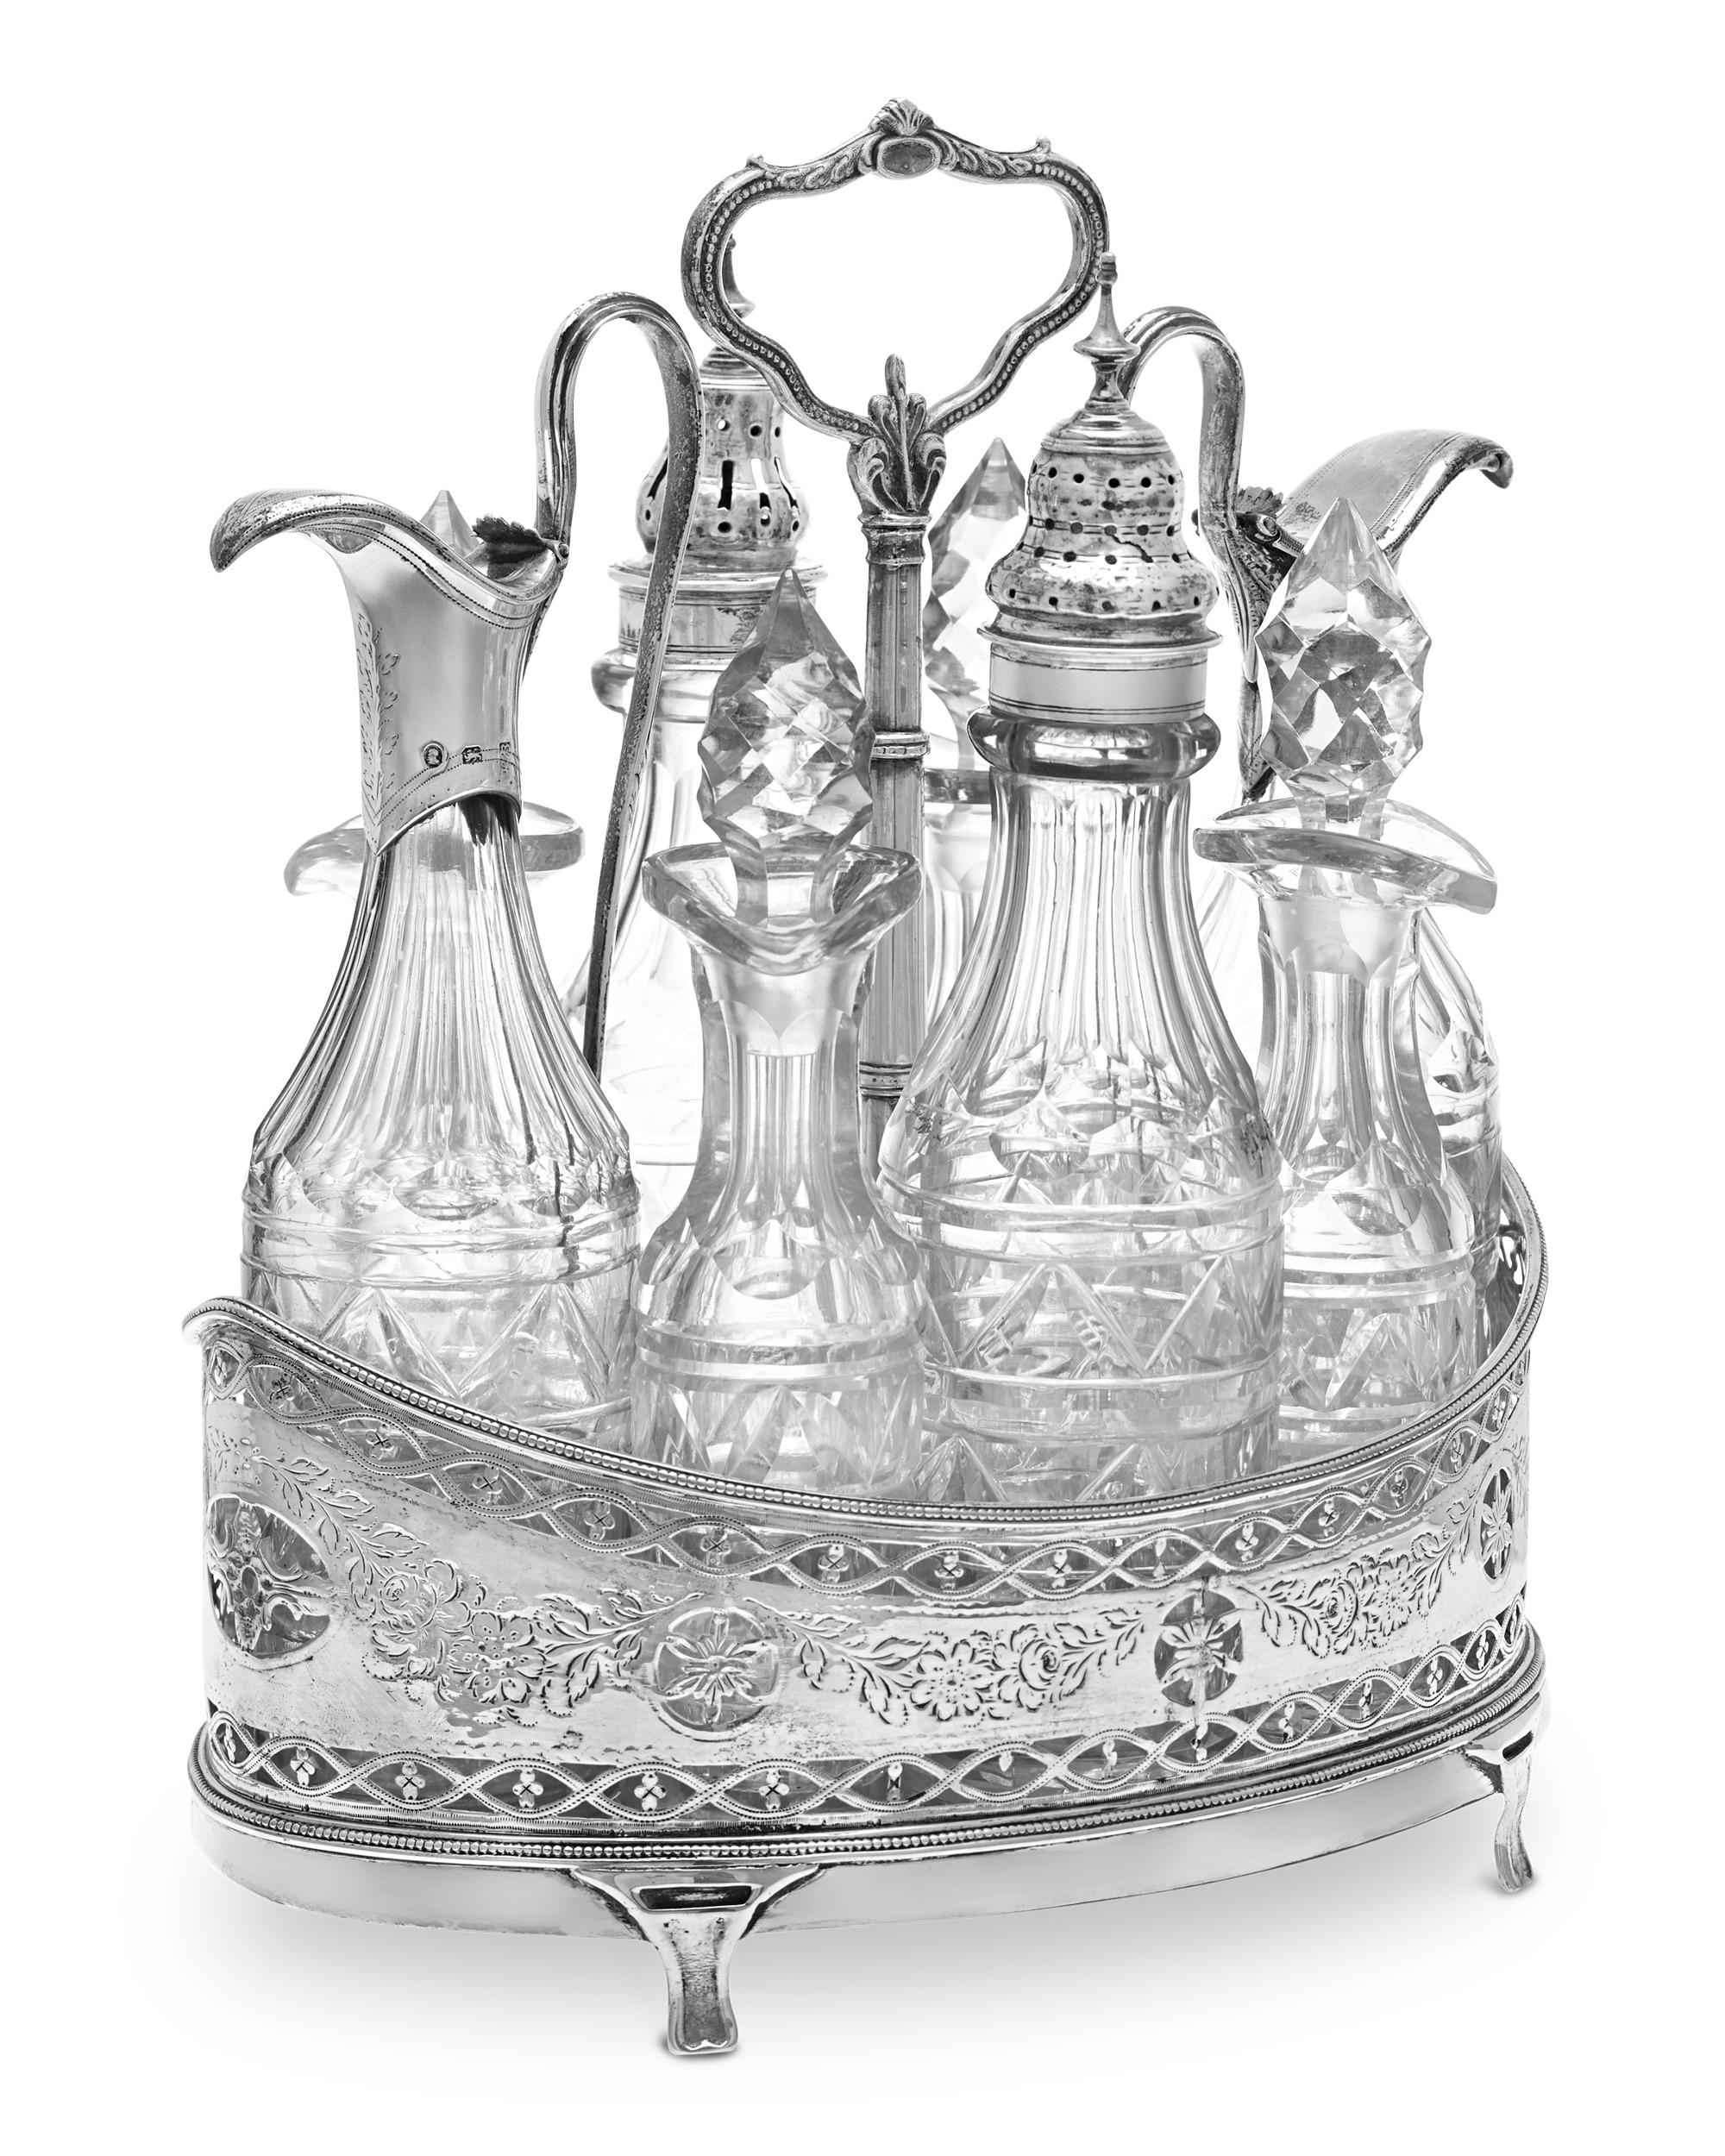 This complete eight-piece silver and crystal cruet set with stand was crafted by the Queen of the Georgian silversmiths, Hester Bateman. Her signature delicate decorative elements are beautifully integrated into the overall design, including